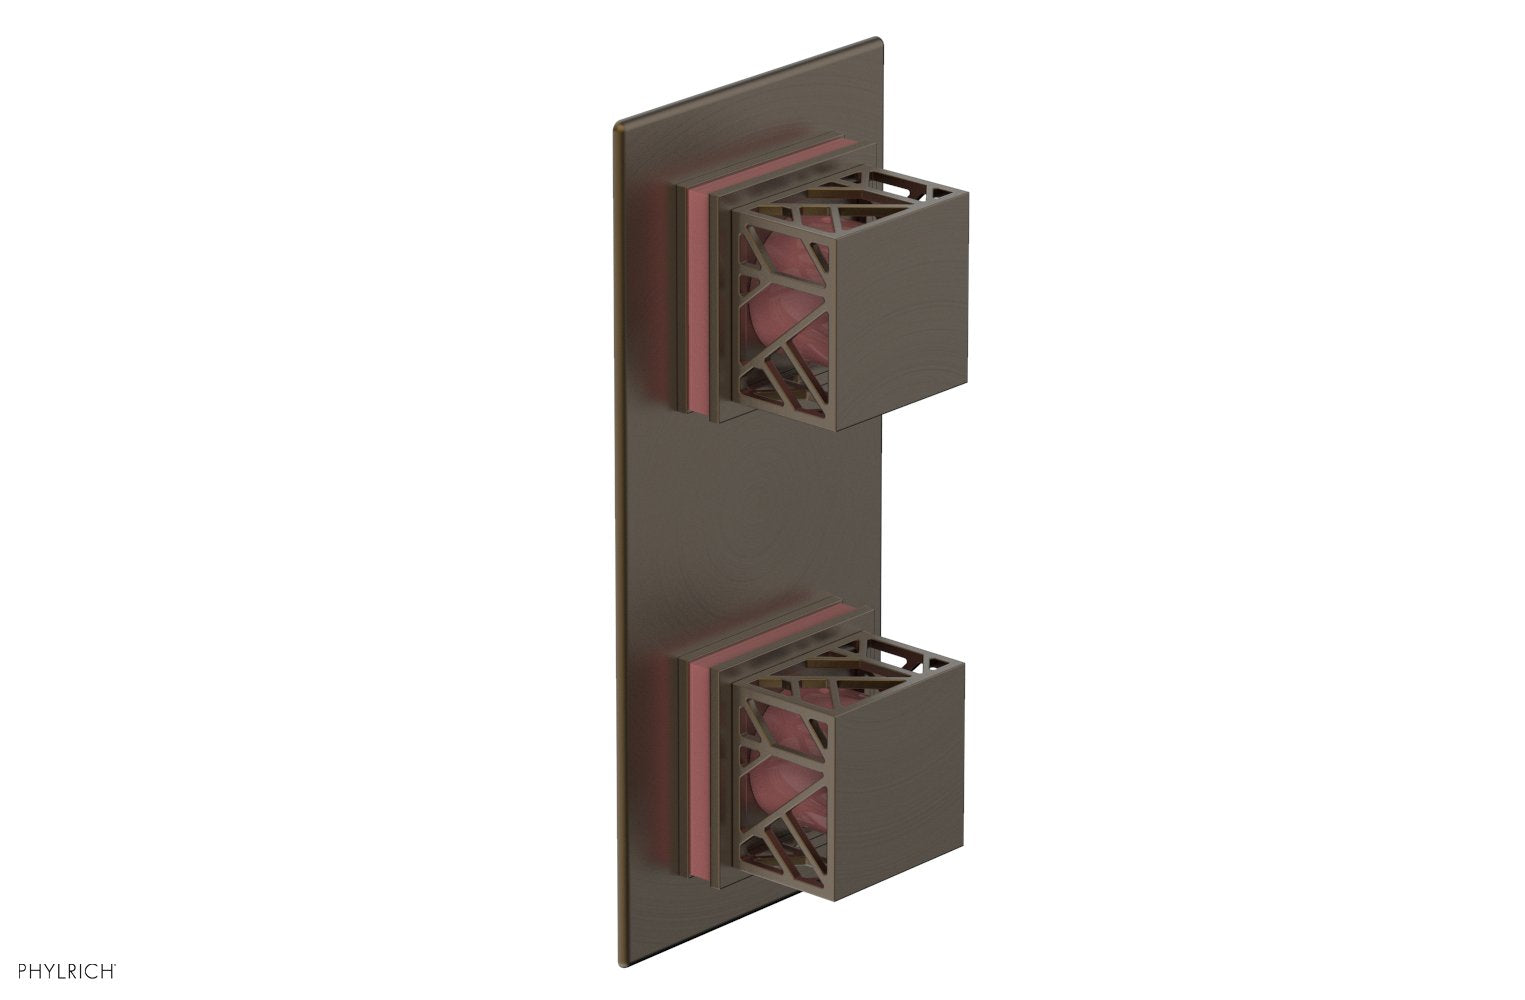 Phylrich JOLIE Thermostatic Valve with Volume Control or Diverter with "Pink" Accents